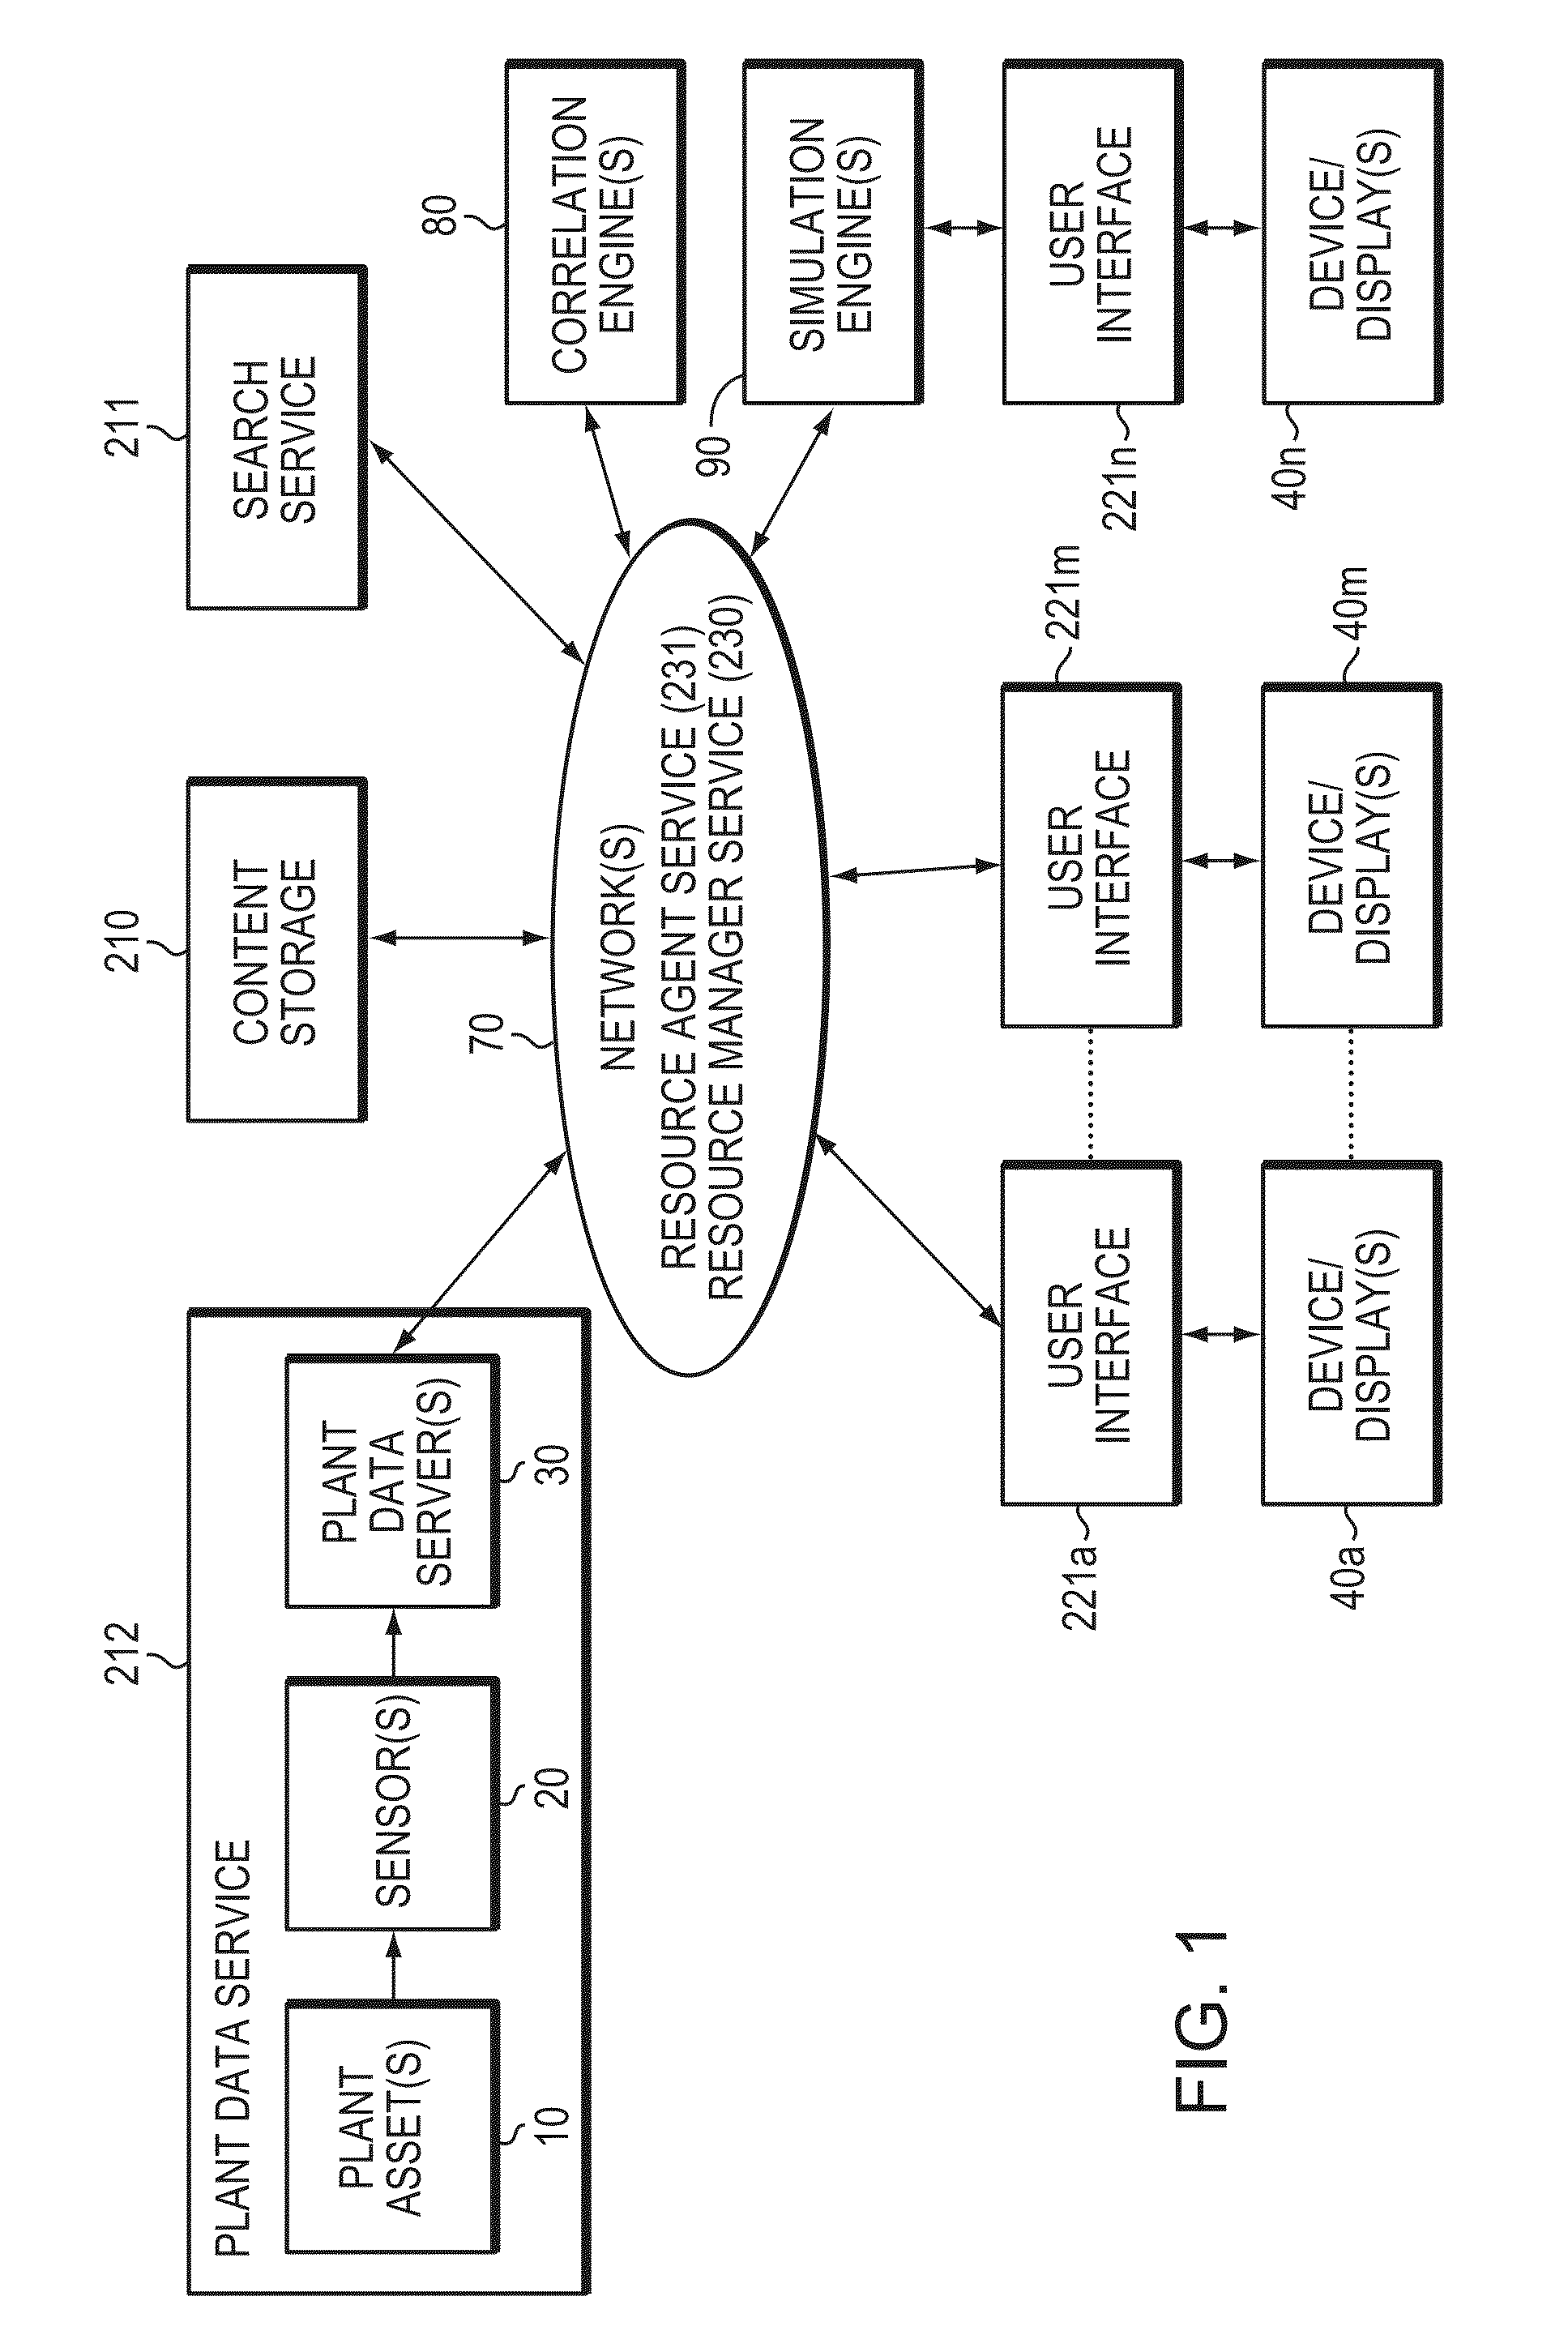 Method and System to Unify and Display Simulation and Real-time Plant Data for Problem-Solving